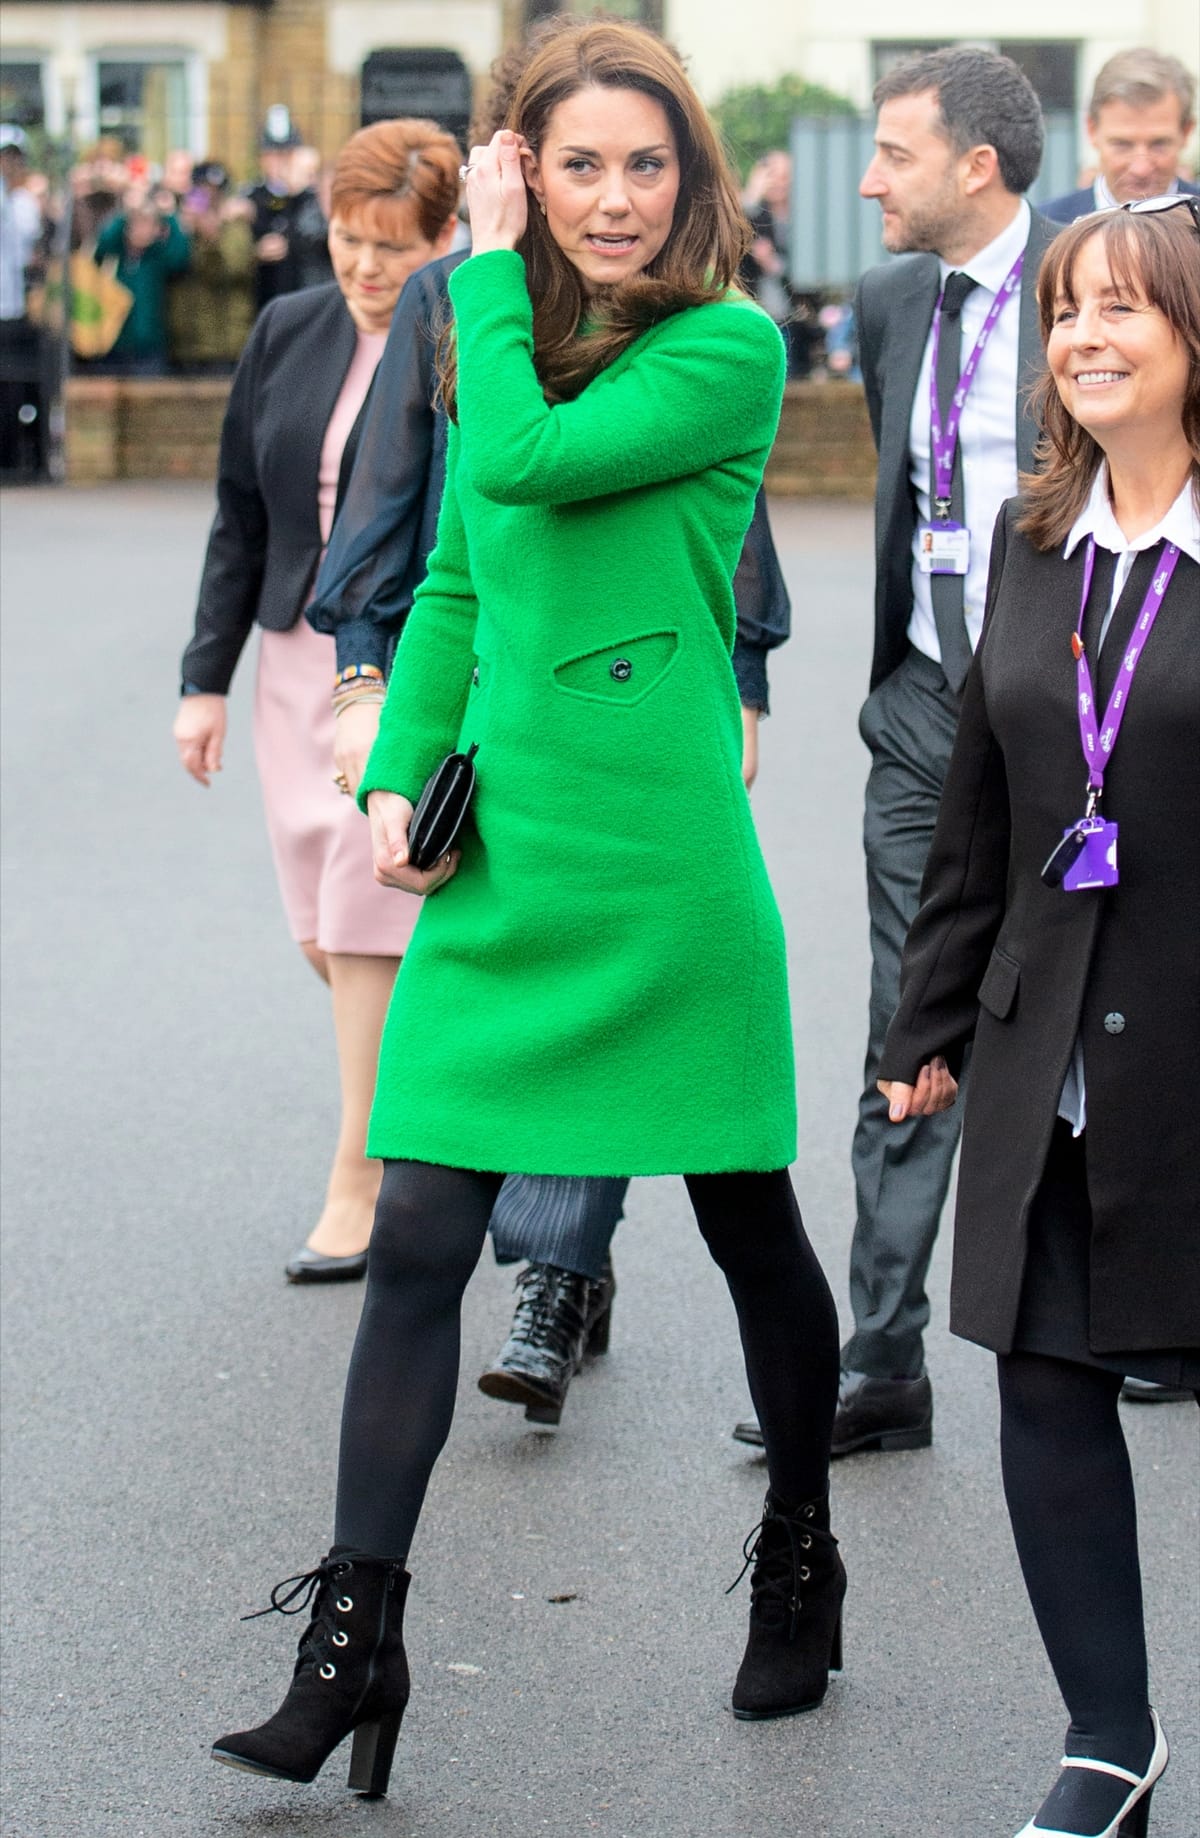 Catherine, Duchess of Cambridge, wears L.K. Bennett boots with a green Eponine dress to visit the Lavender Primary School in support of Place2Be’s Children’s Mental Health Week in London, England, on February 5, 2019